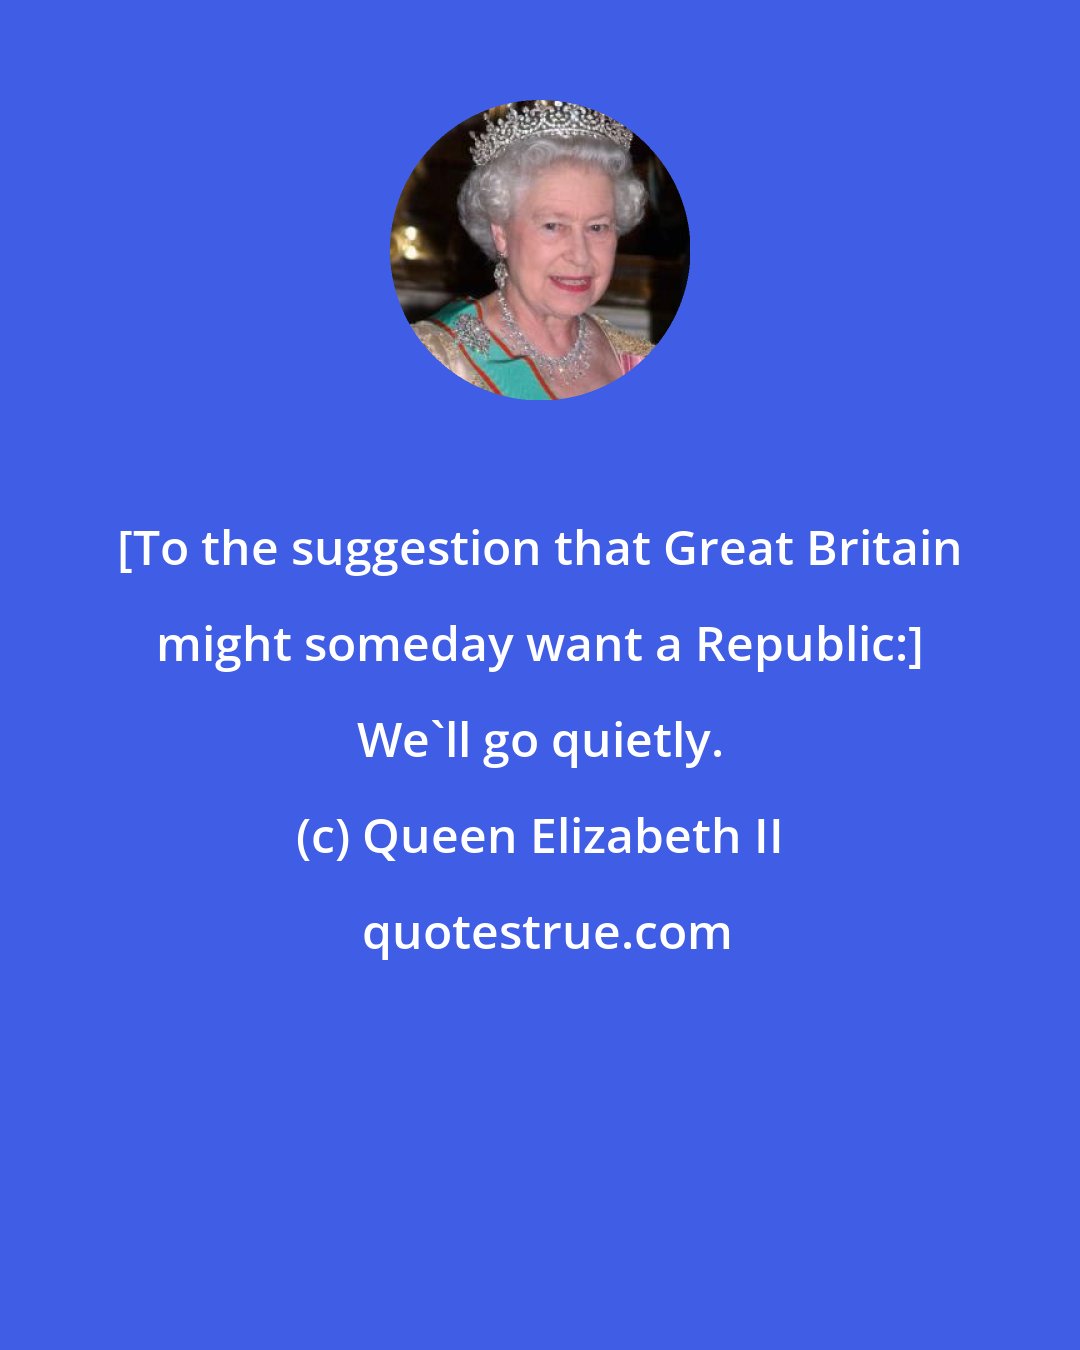 Queen Elizabeth II: [To the suggestion that Great Britain might someday want a Republic:] We'll go quietly.